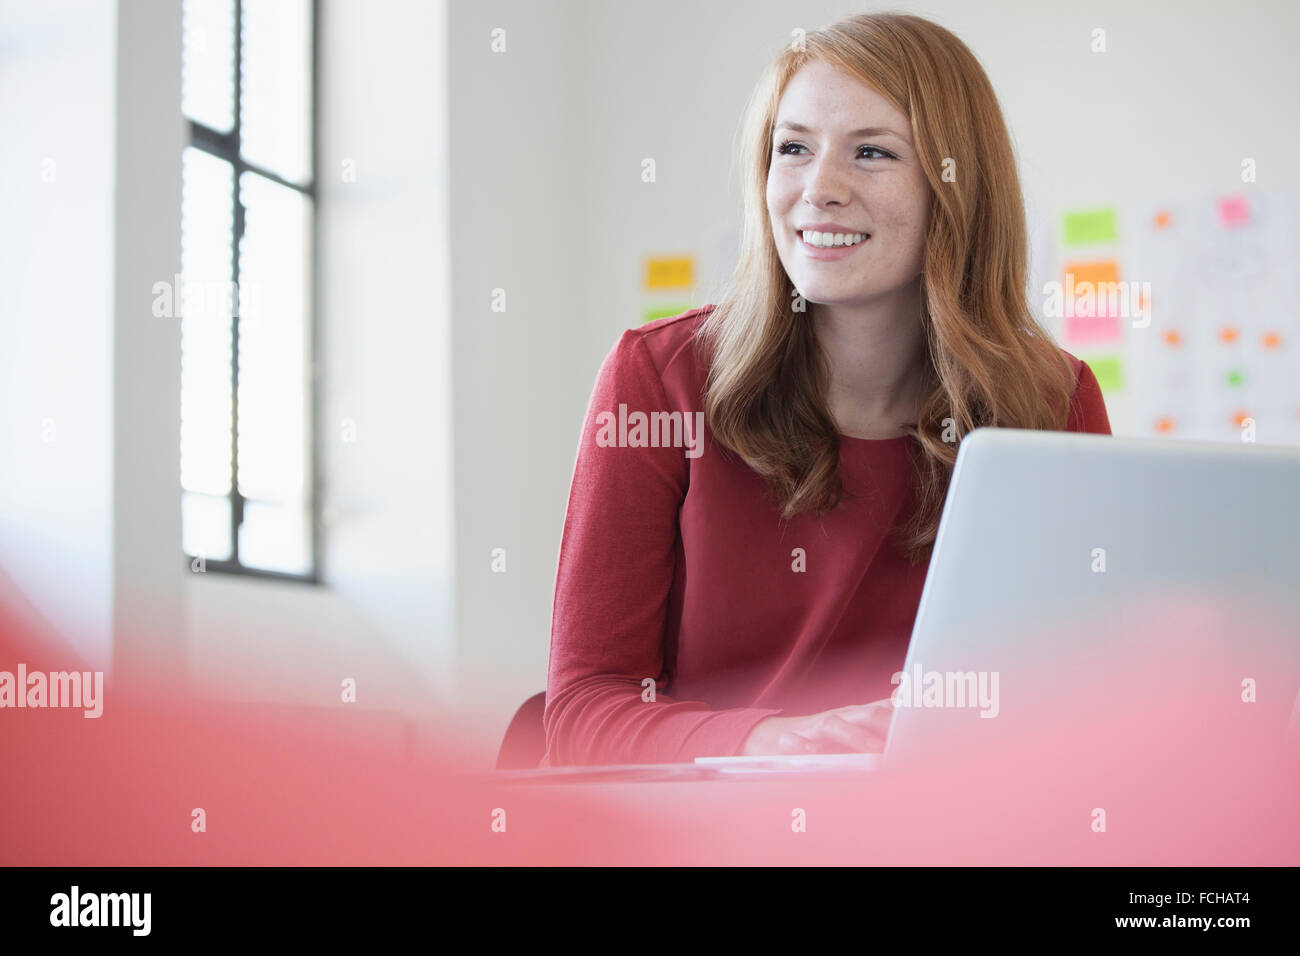 Young woman in office using laptop Stock Photo